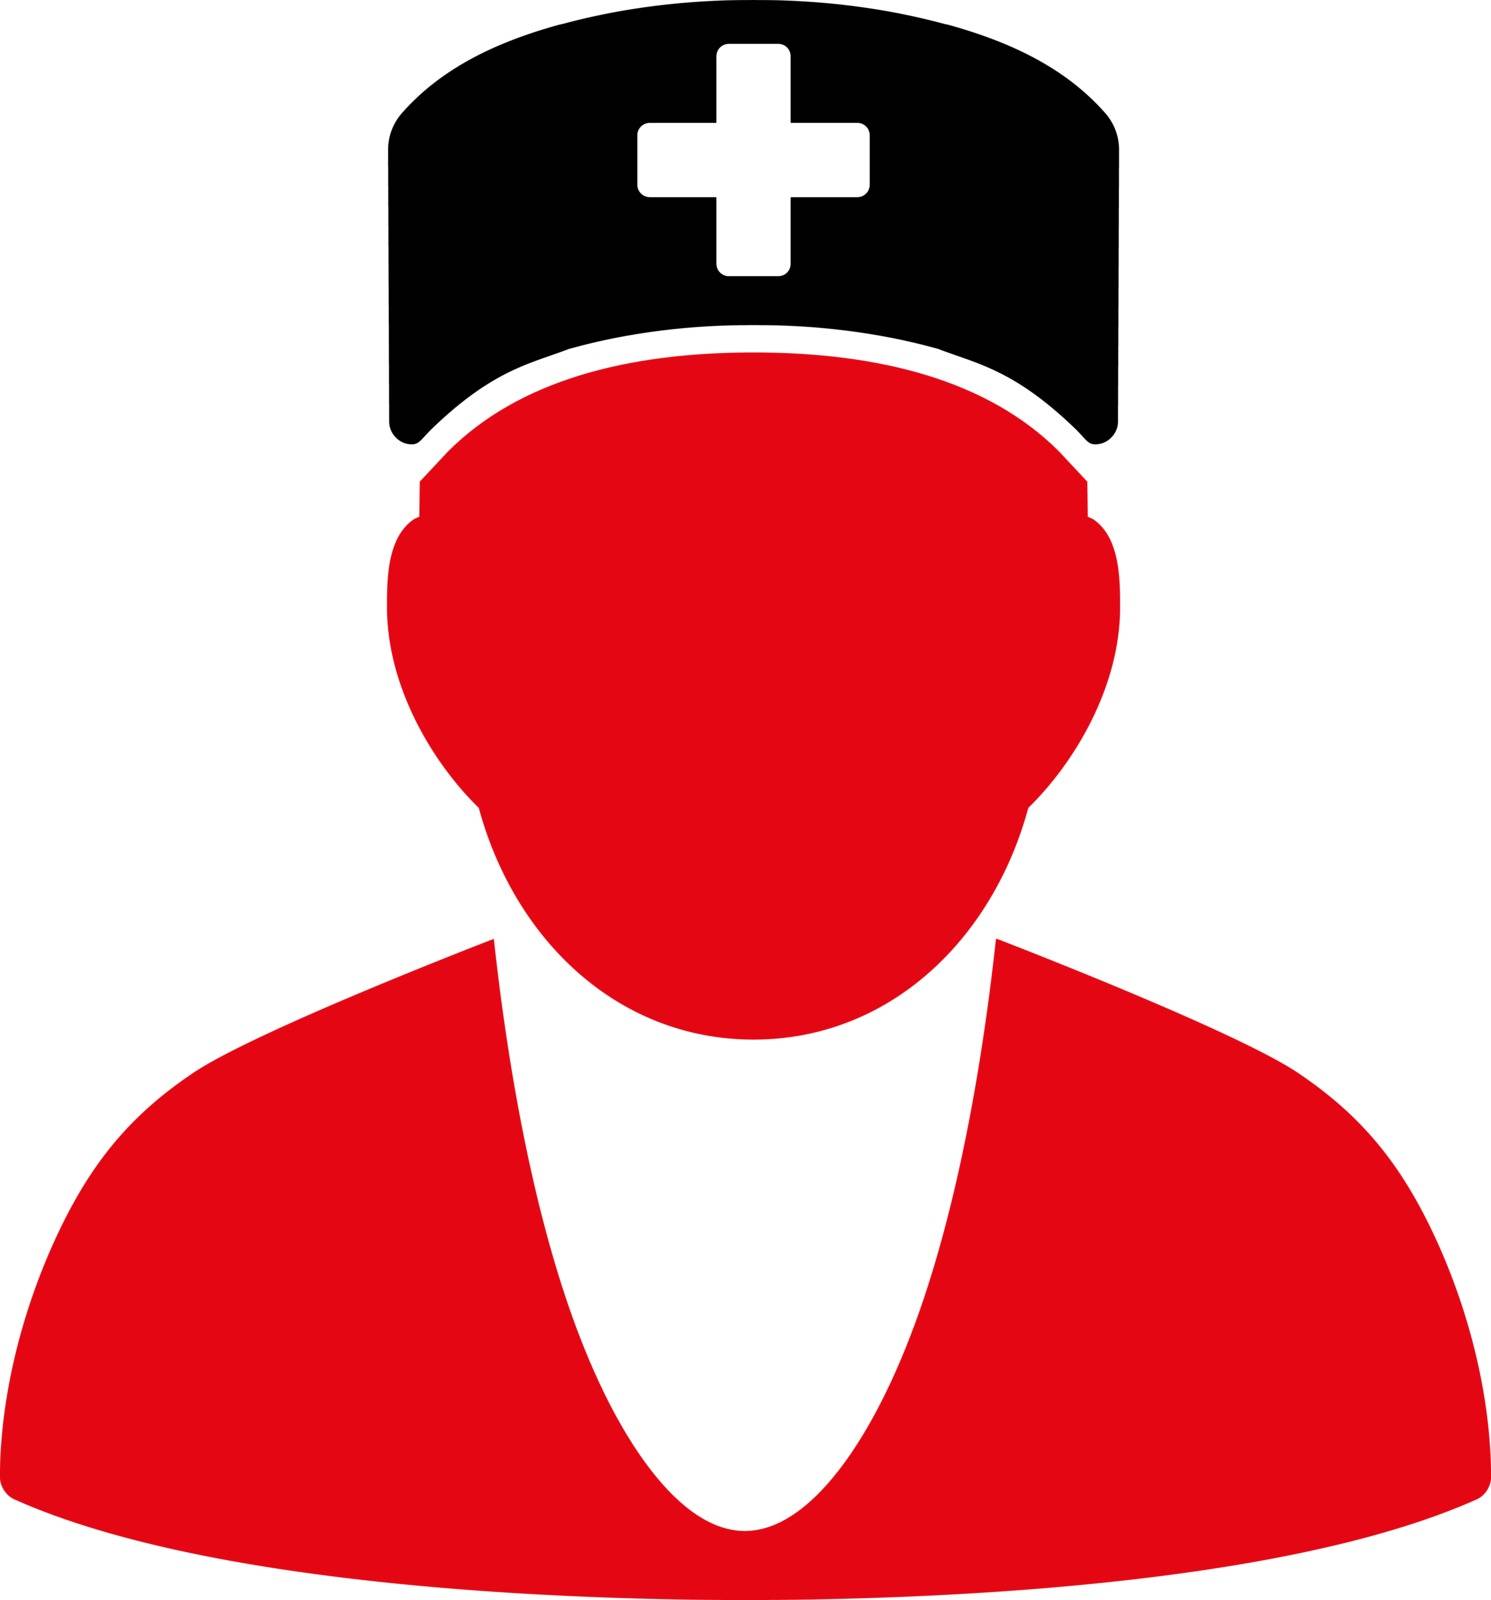 Medic vector icon. Style is bicolor flat symbol, intensive red and black colors, rounded angles, white background.